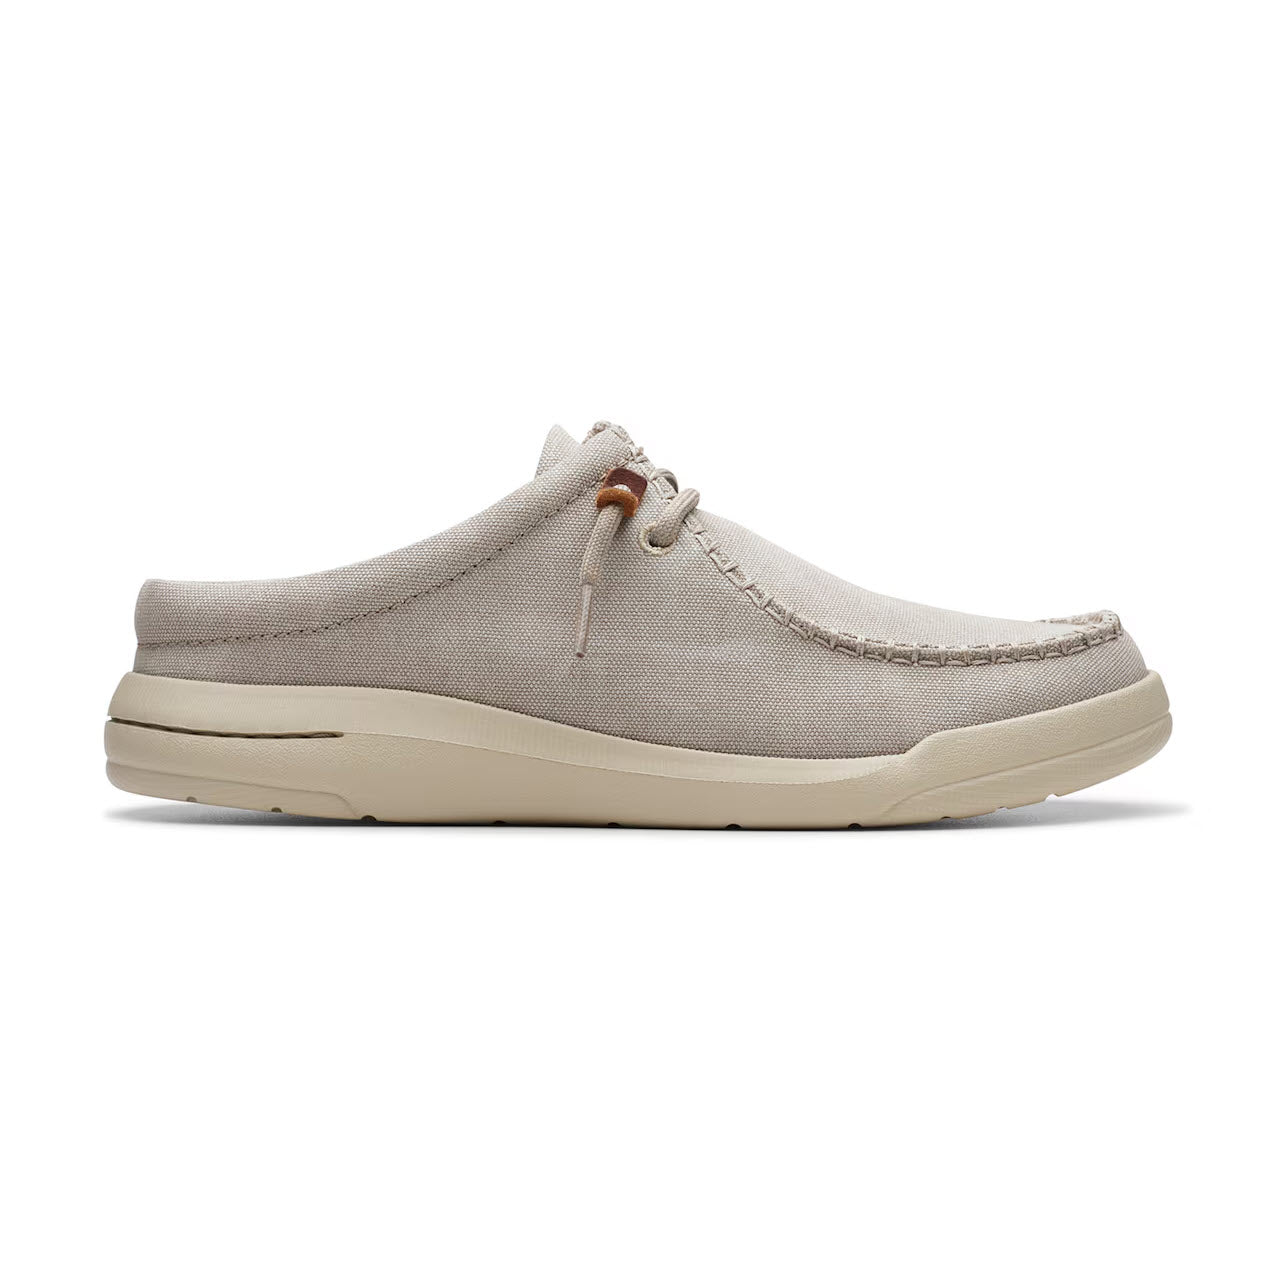 A light grey textured slip-on boat shoe with an Extreme Comfort foam footbed and a white rubber sole, displayed on a white background.